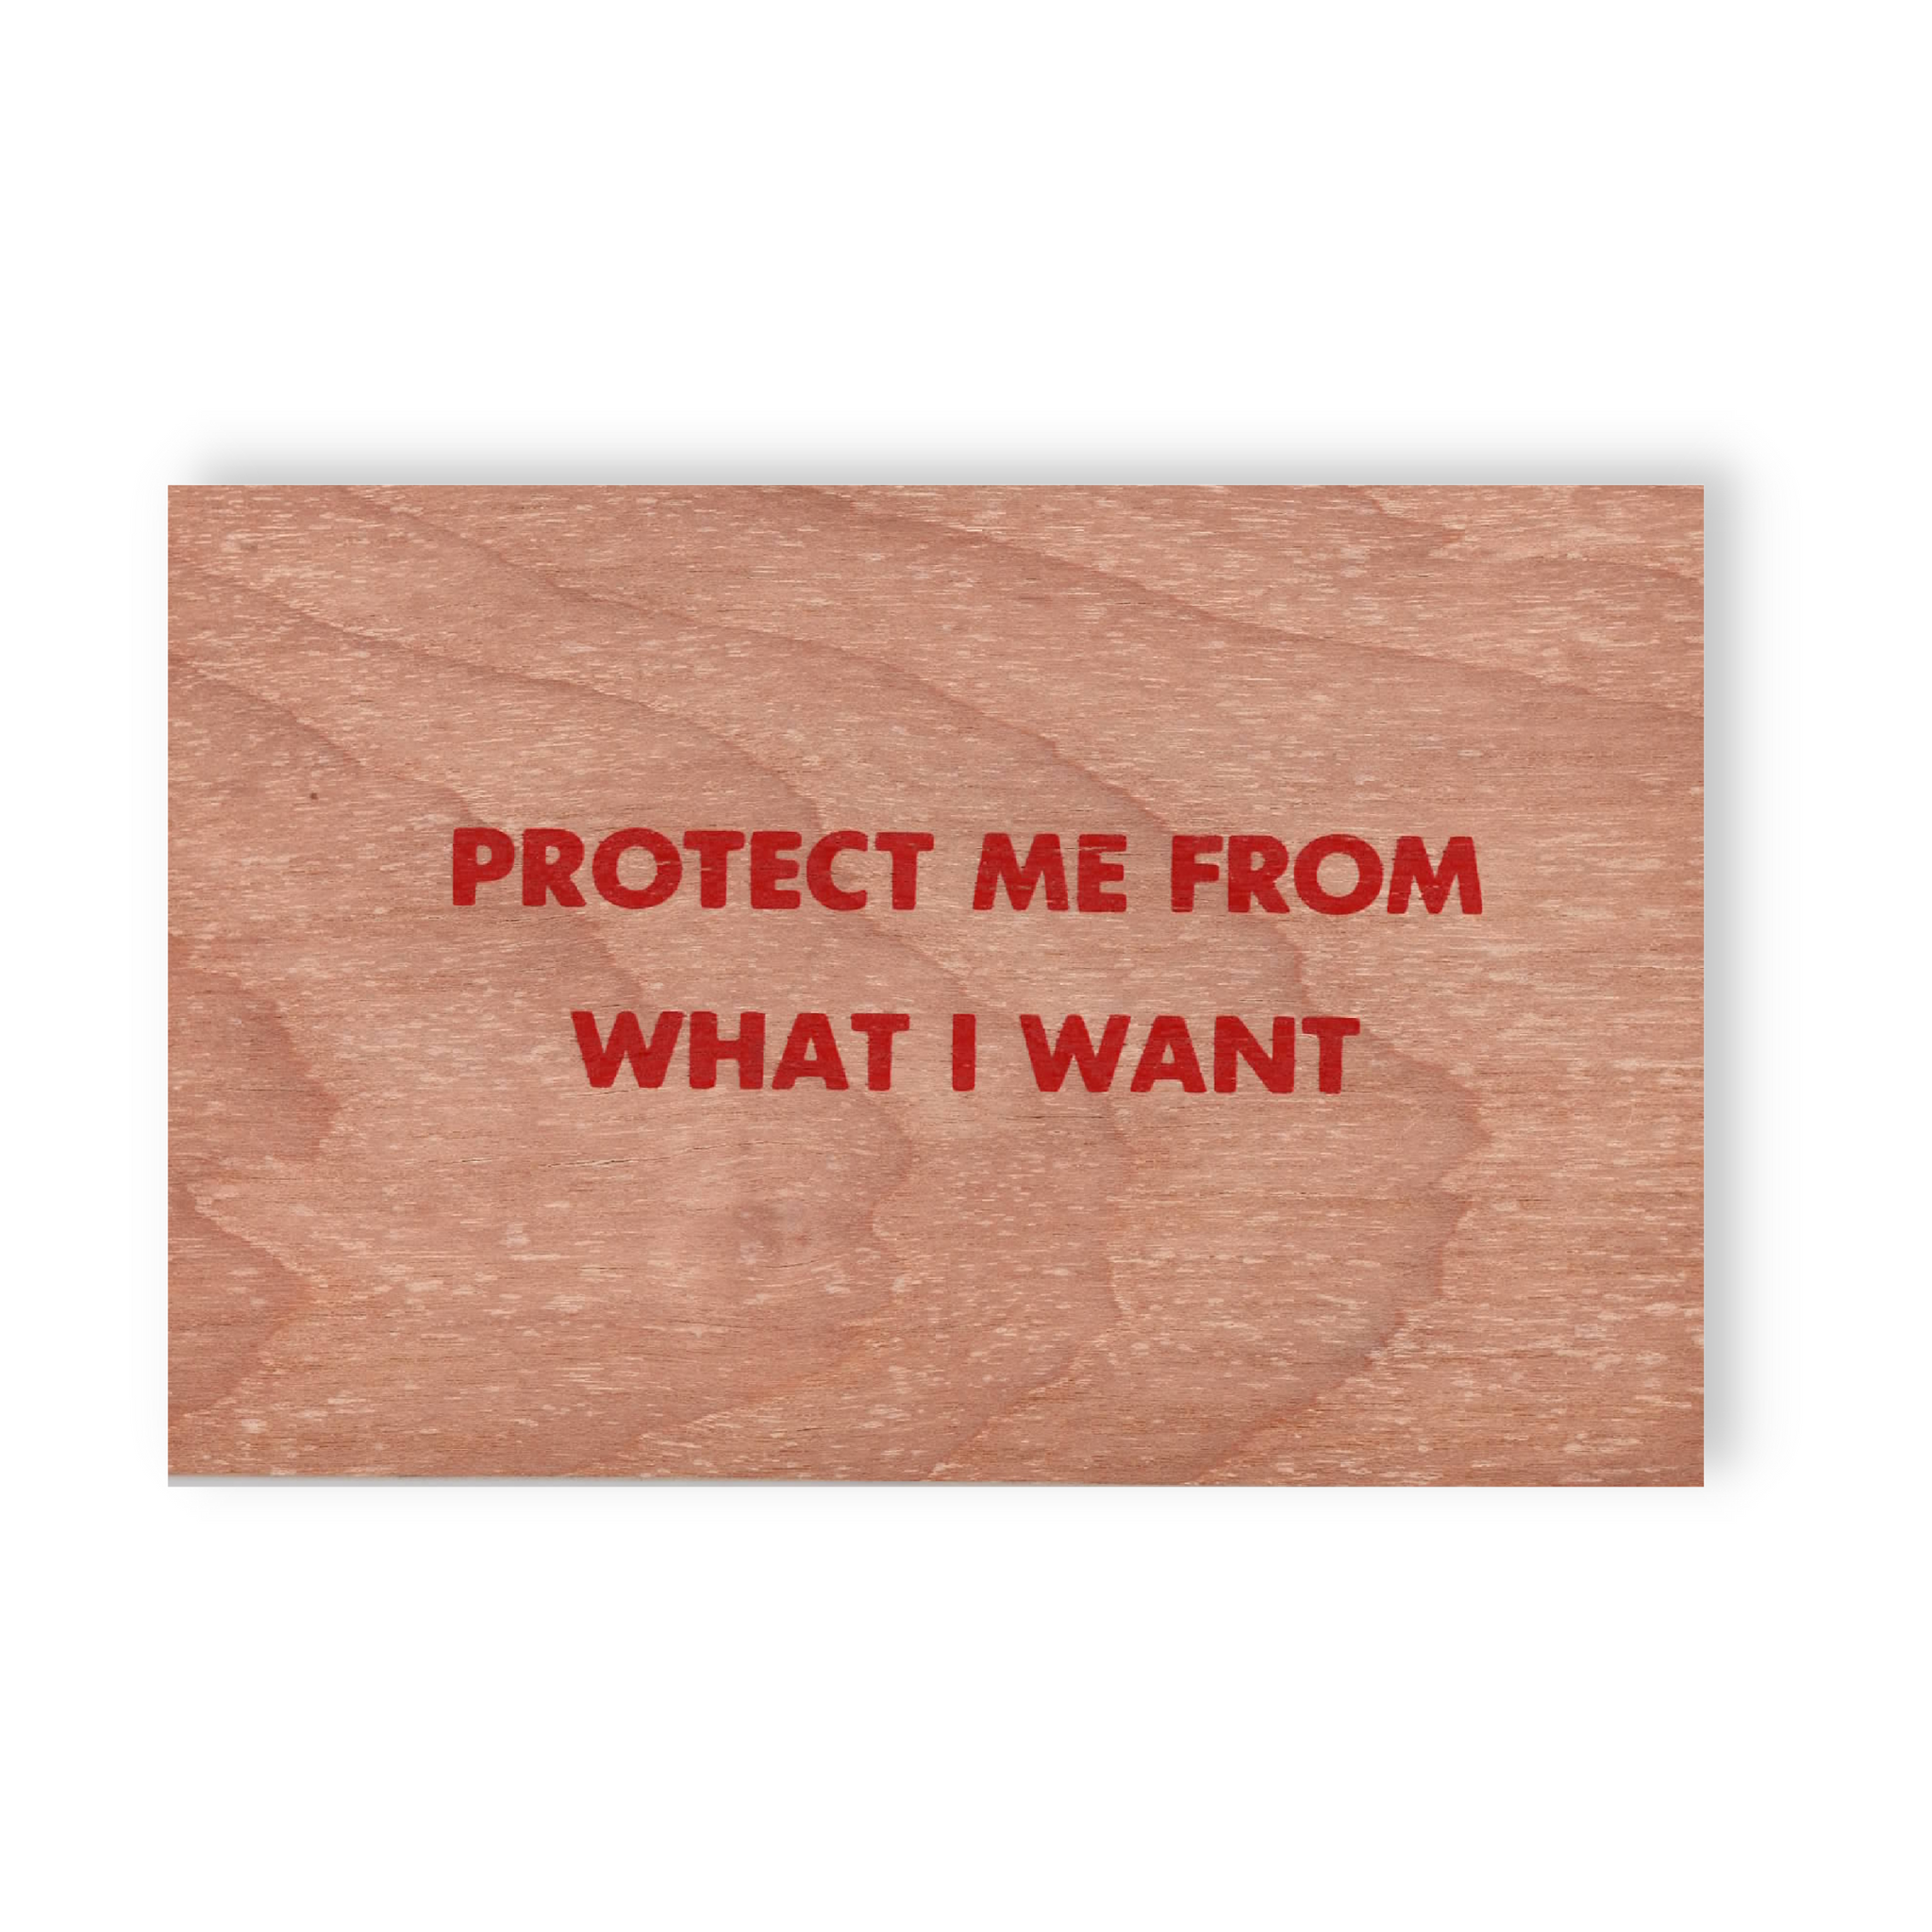 Jenny Holzer - Truism [Protect Me From What I Want]